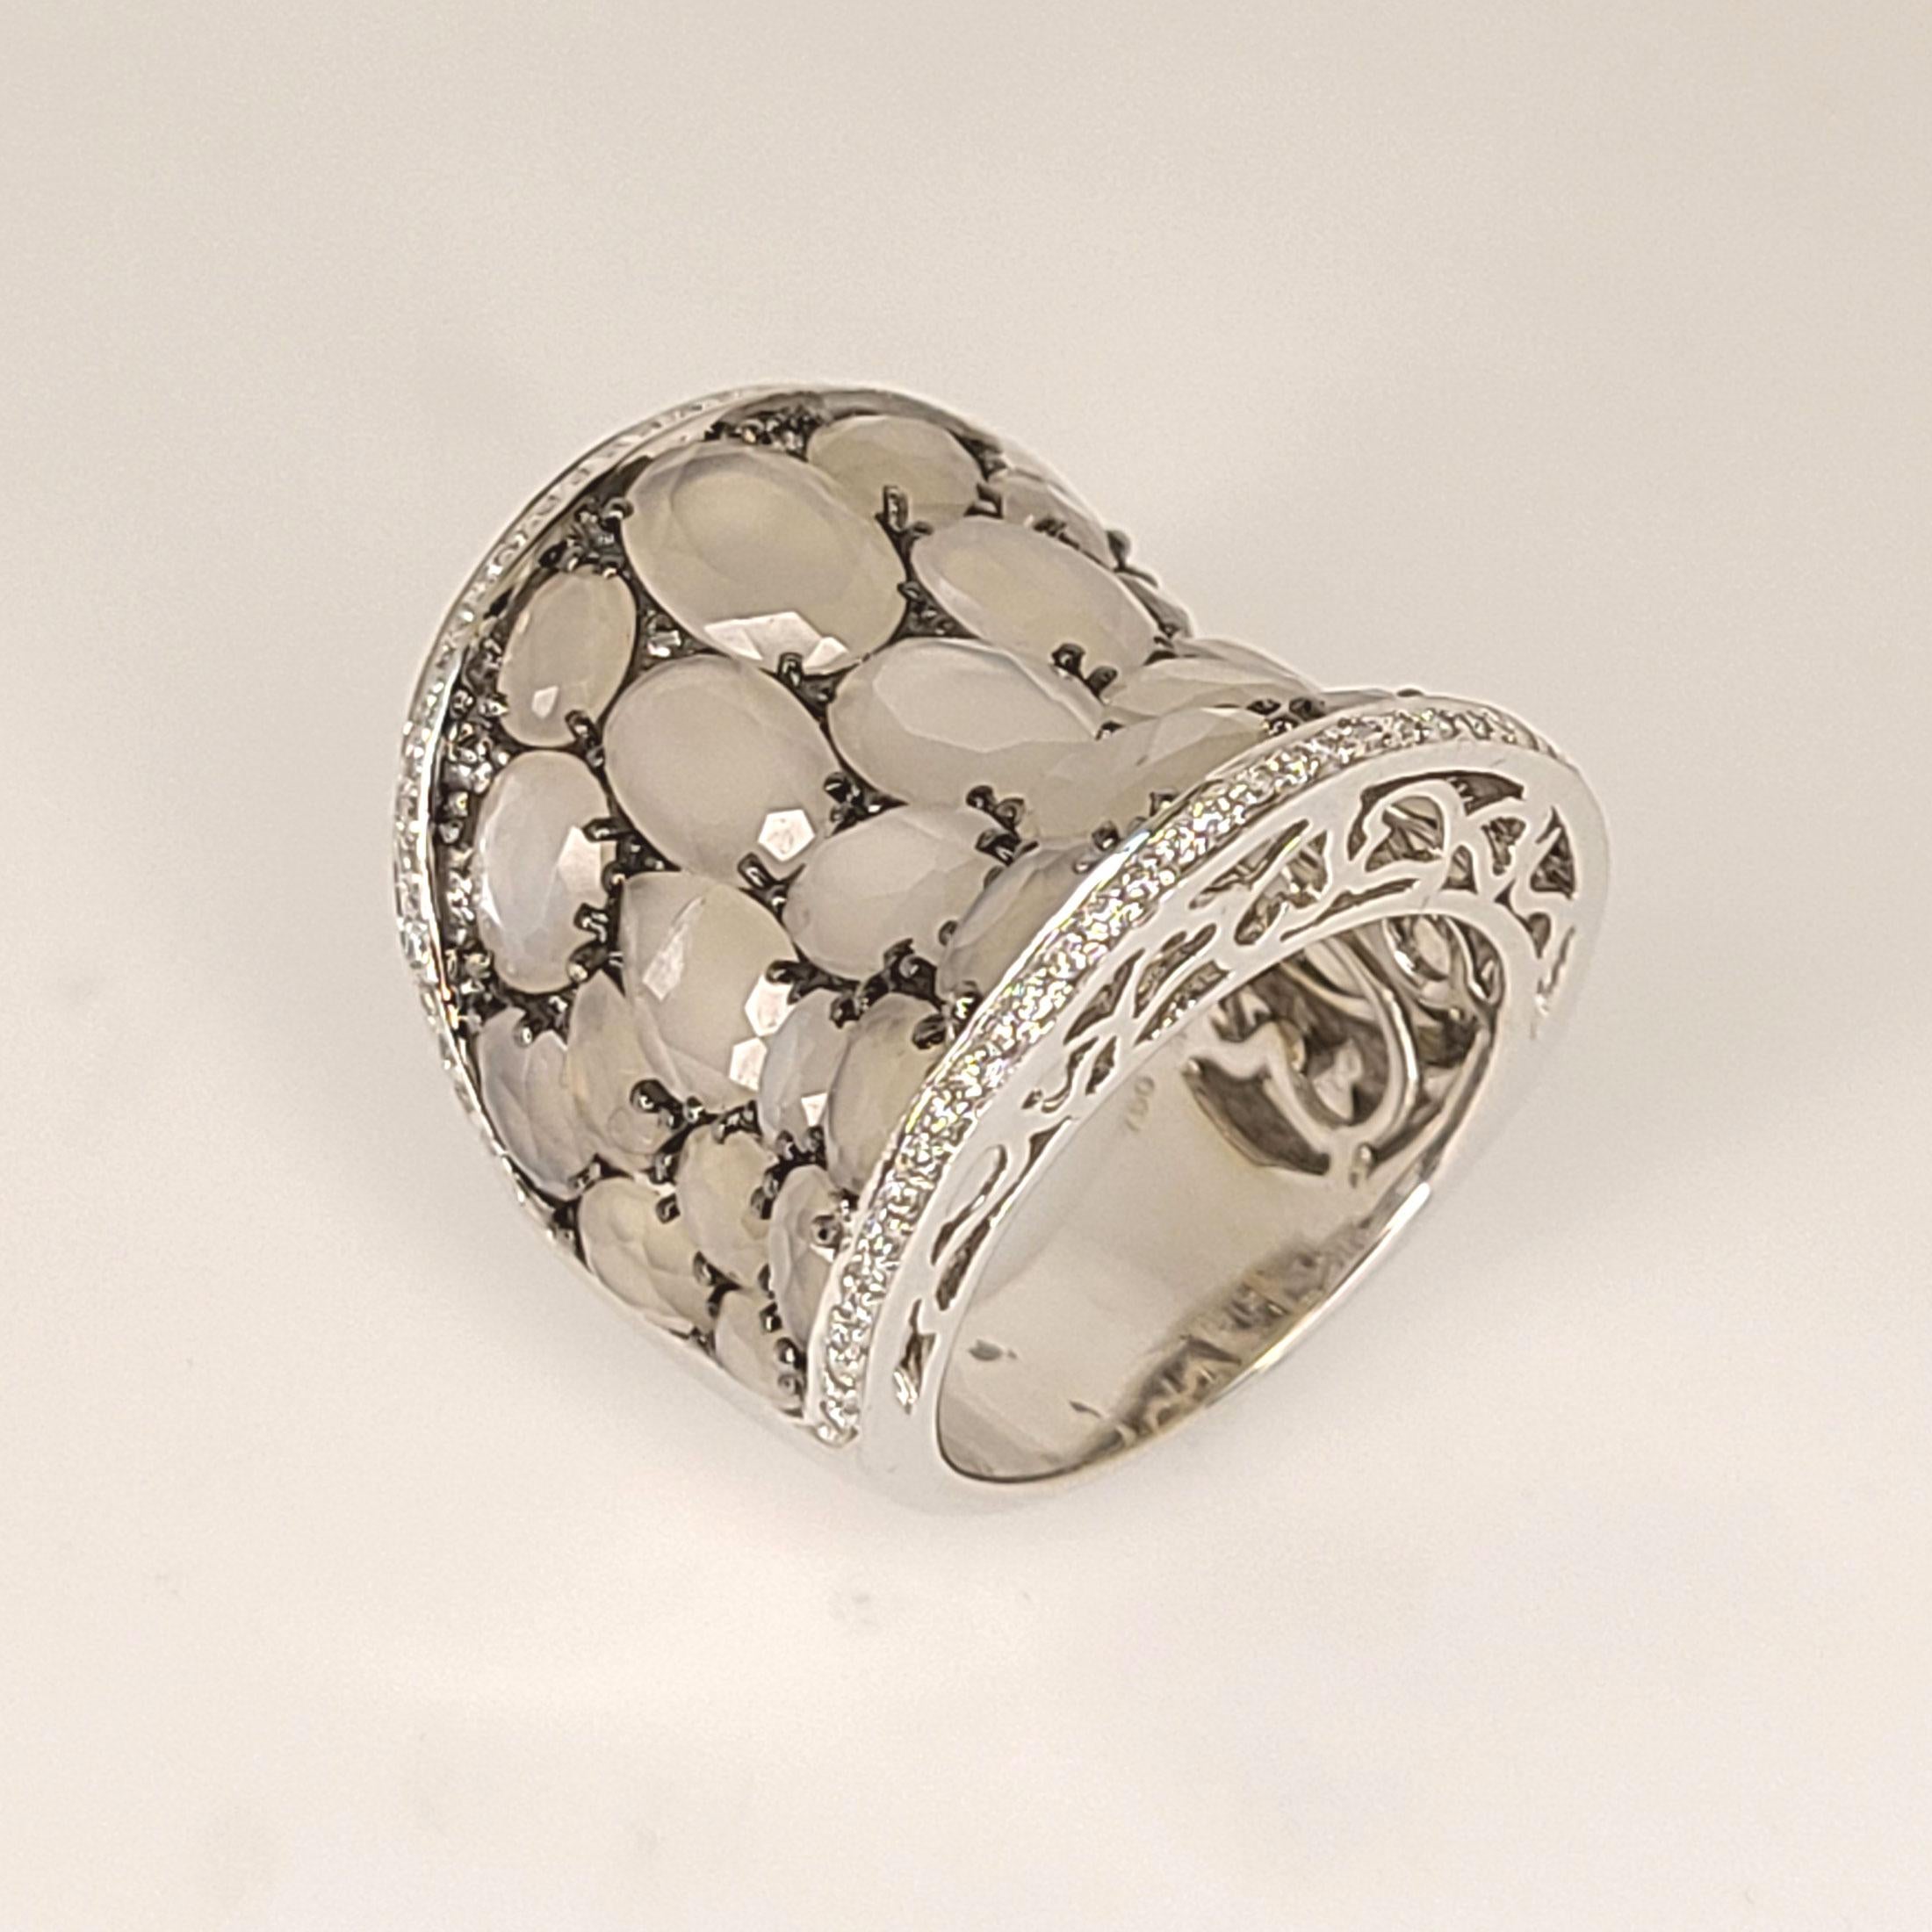 This 18K white gold moonstone ring is made in 2013. This is one of a kind ring and has no continuation. This ring is for long fingers and would perfectly fit to sizes 7 to 7+. It may be slightly sized upon order. In between stones, the gold prongs